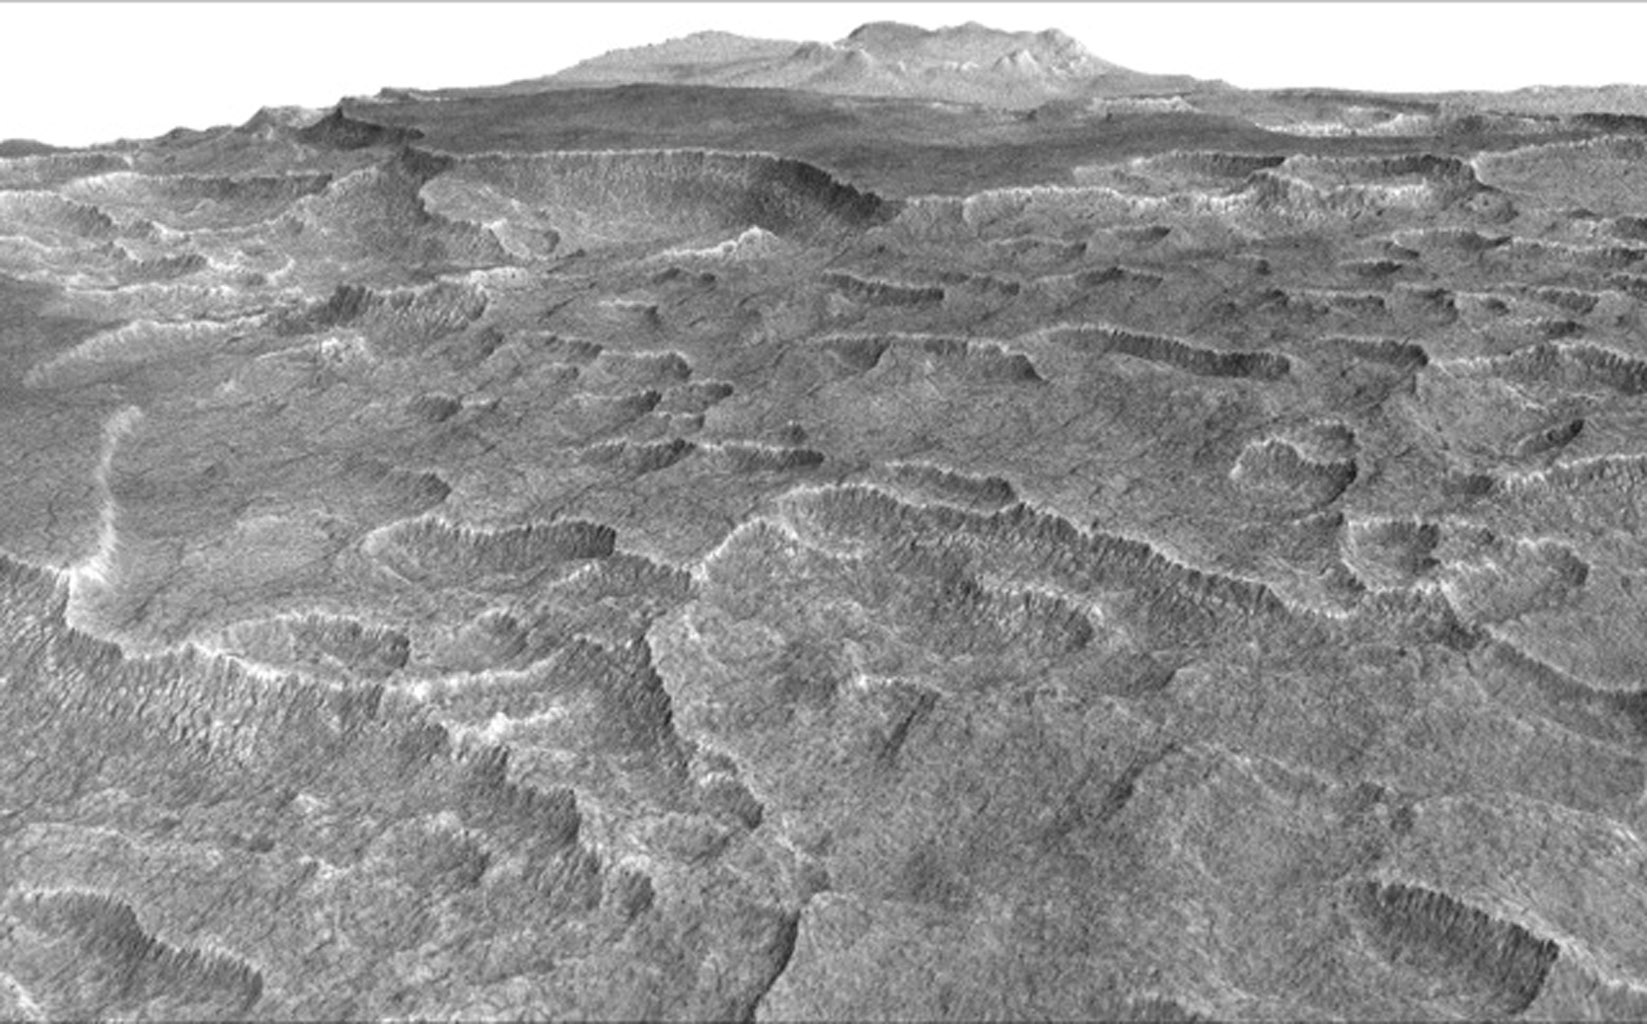 This vertically exaggerated view shows scalloped depressions in Mars' Utopia Planitia region, one of the area's distinctive textures that prompted researchers to check for underground ice, using ground-penetrating radar aboard NASA's Mars Reconnaissance Orbiter.